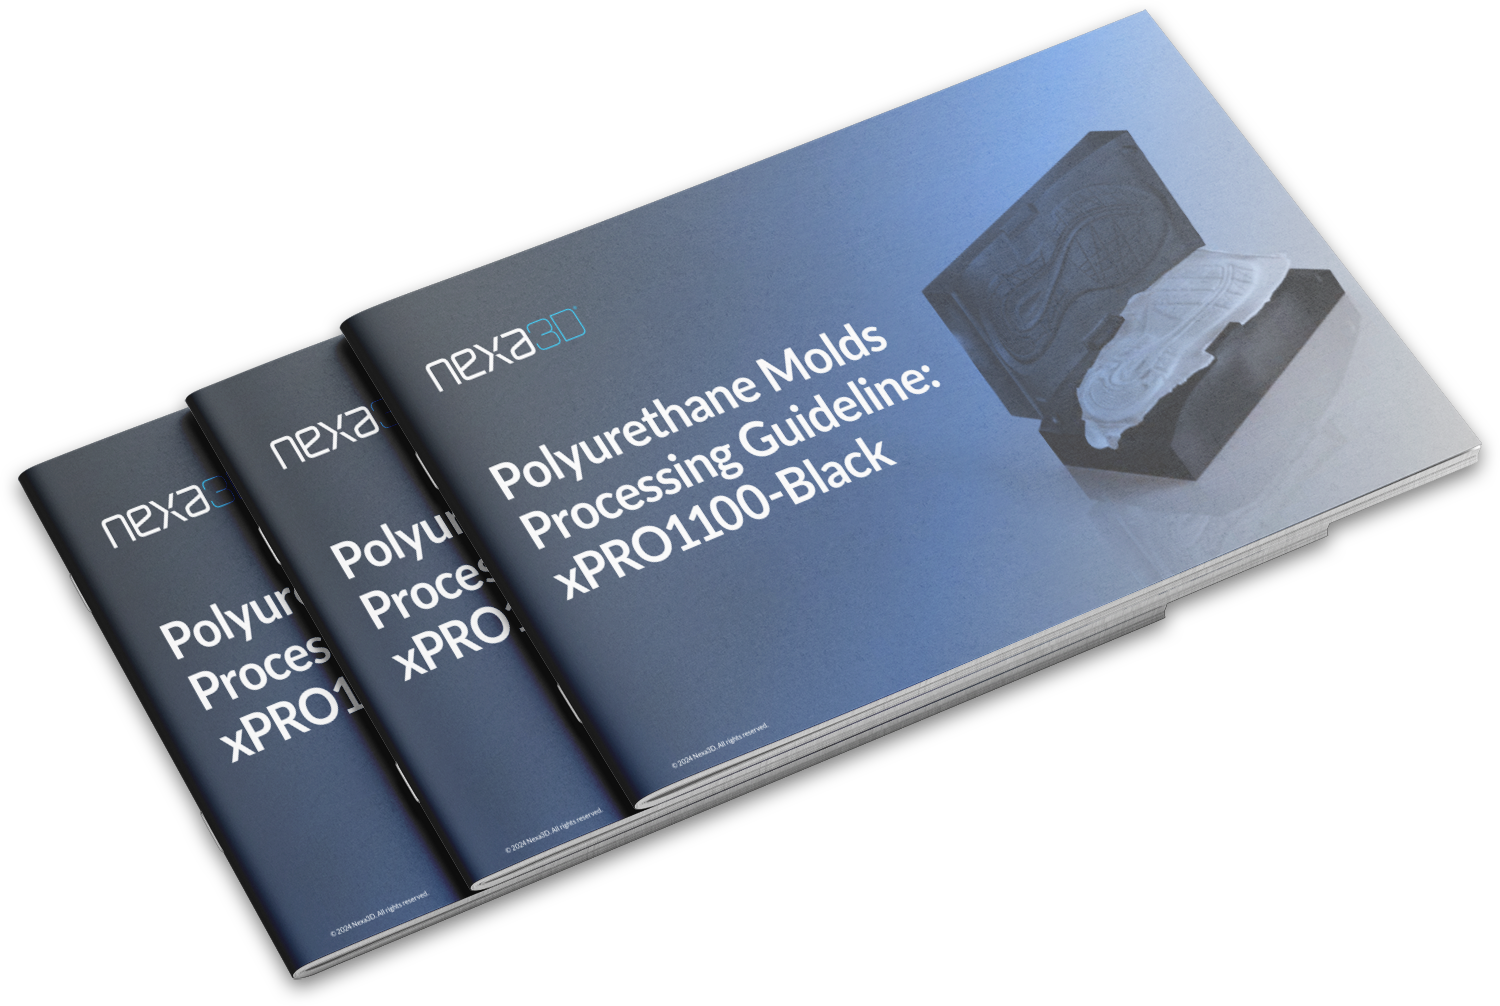 Download Polyurethane Molds Processing Guideline: xPRO1100-Black